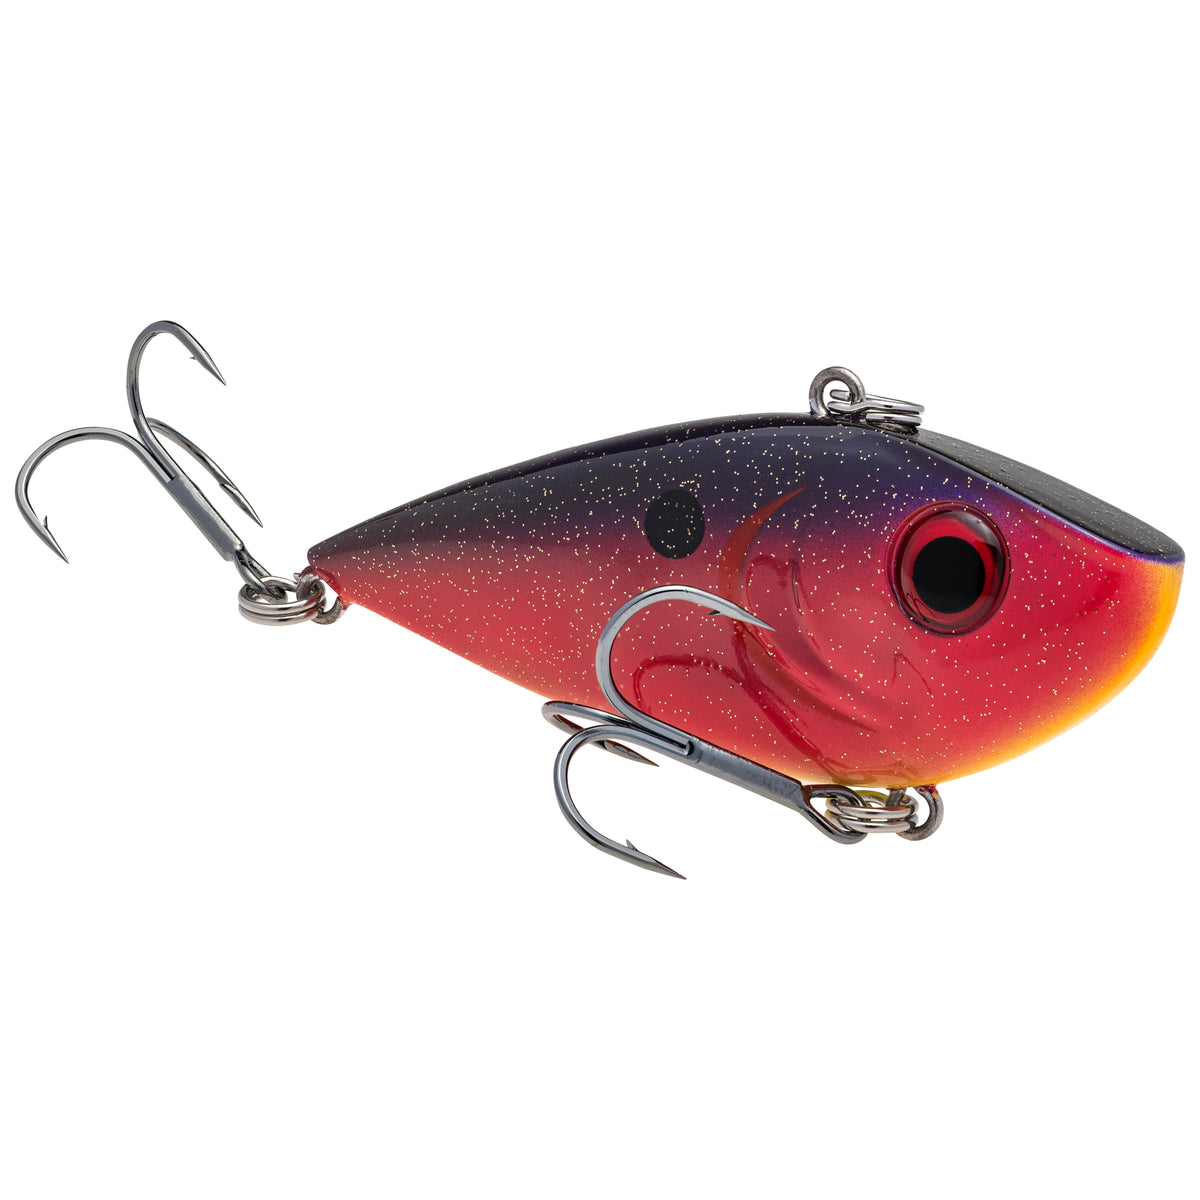 Strike King Topwater Fishing Baits, Lures Shad for sale